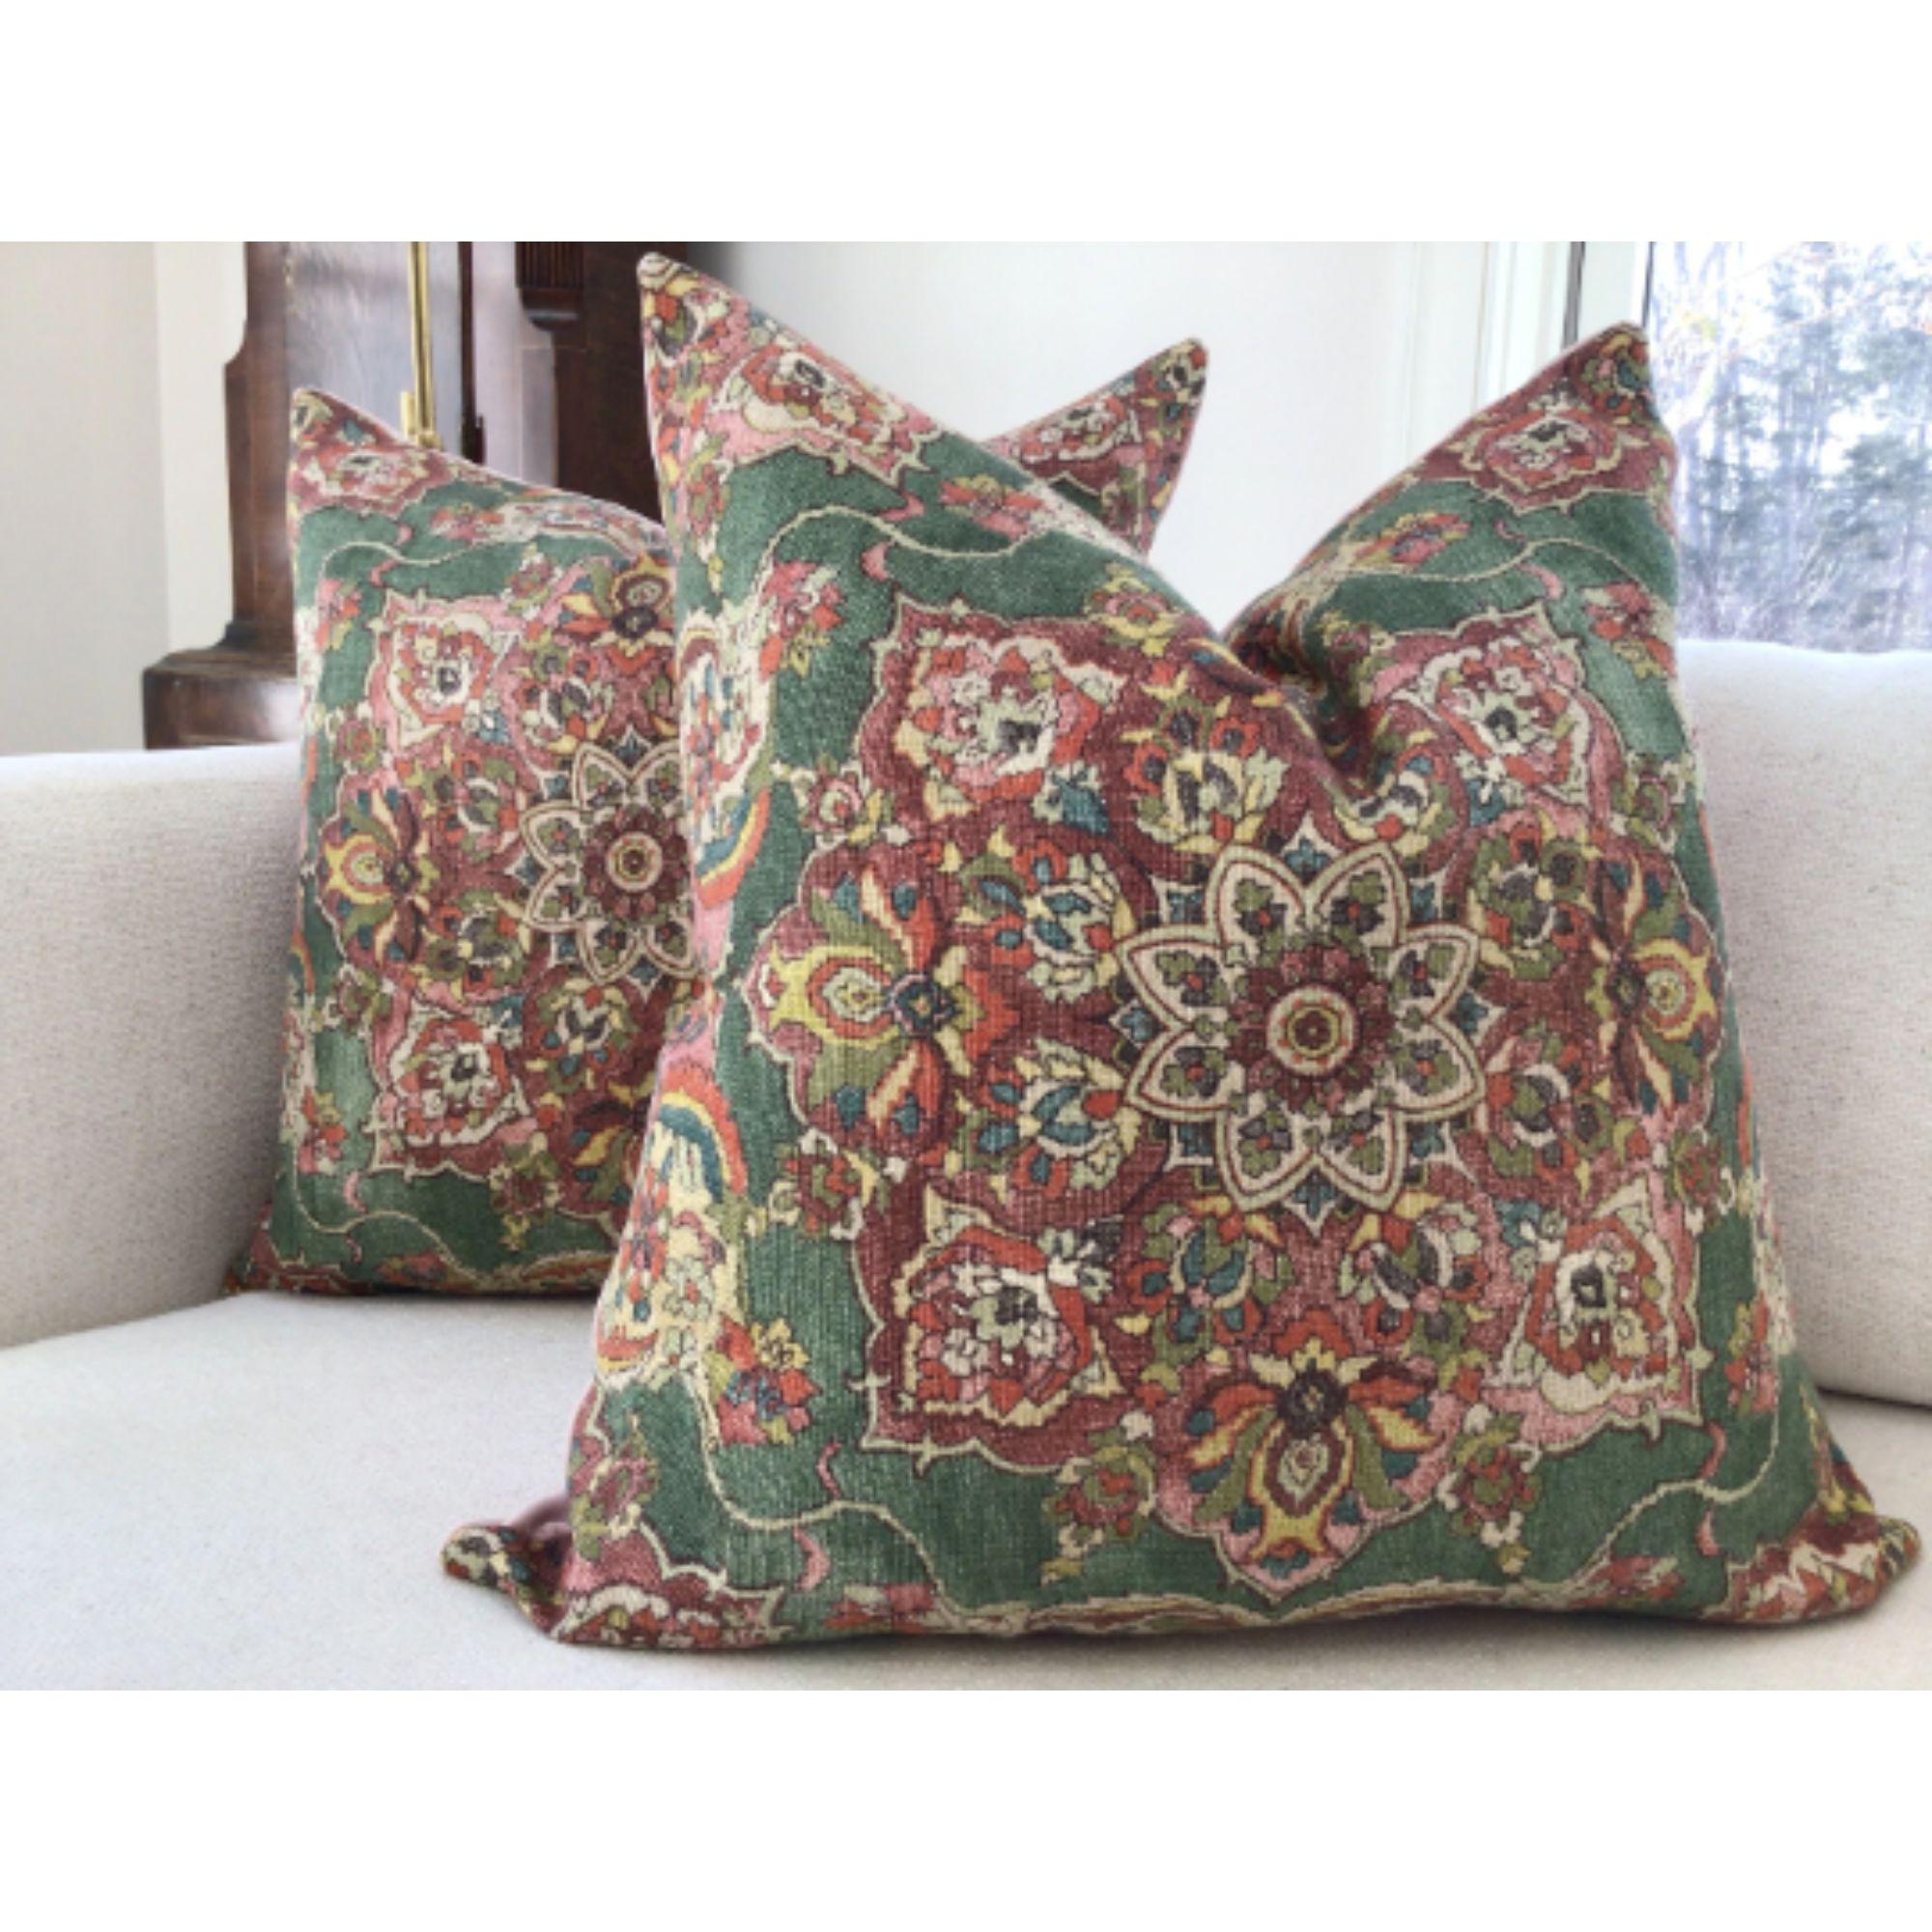 Like a lovely antique Persian rug…Granada in jewel features a center medallion with rich details in jewel tones of emerald green, spice, ruby, and pink.

Lovely.

These will come in a 22” pair with plush-down inserts and be backed in a plush emerald